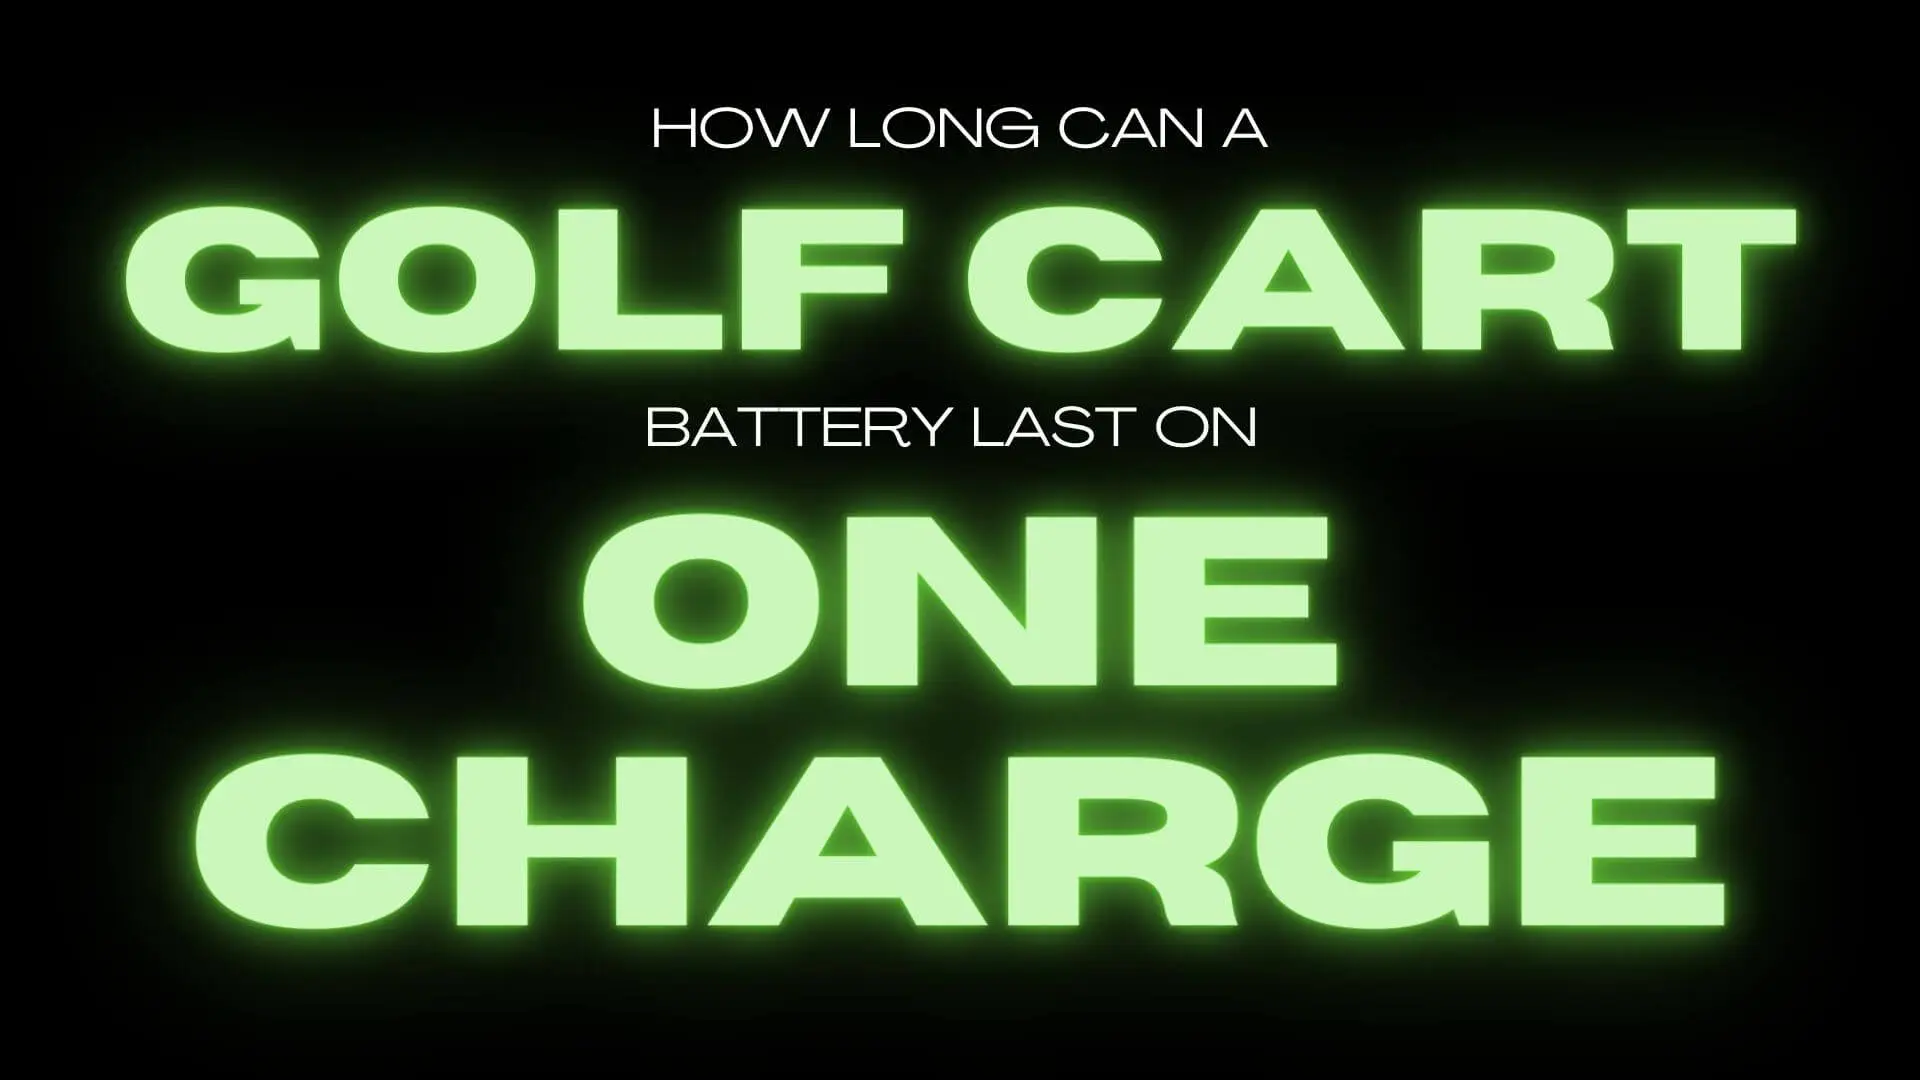 How Long Can A Golf Cart Battery Last On One Charge